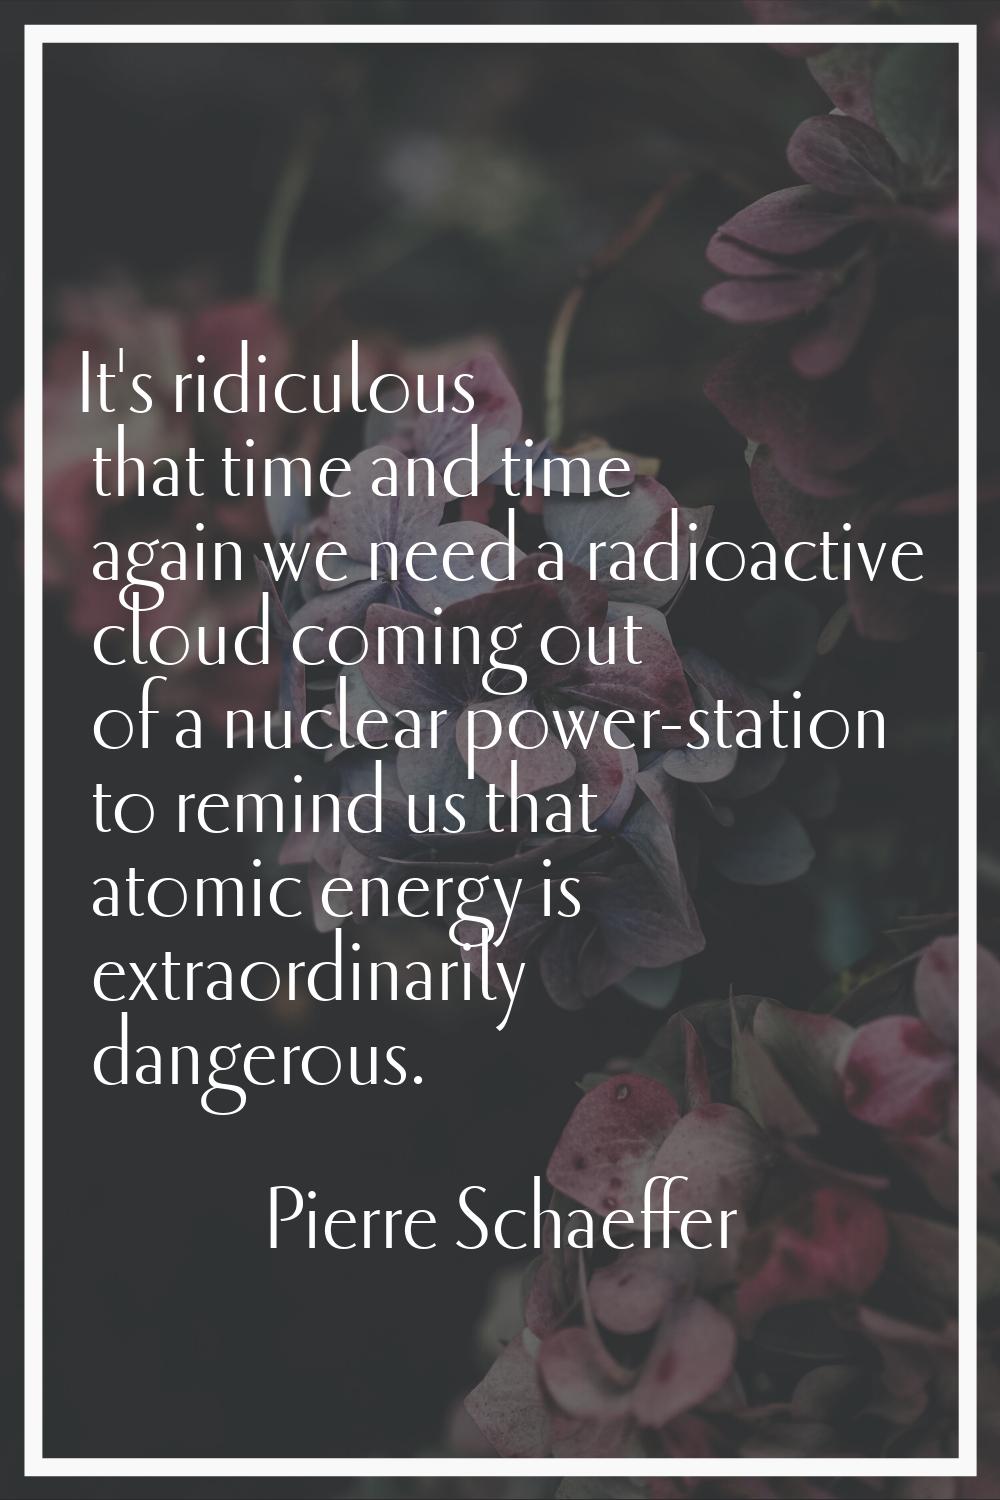 It's ridiculous that time and time again we need a radioactive cloud coming out of a nuclear power-